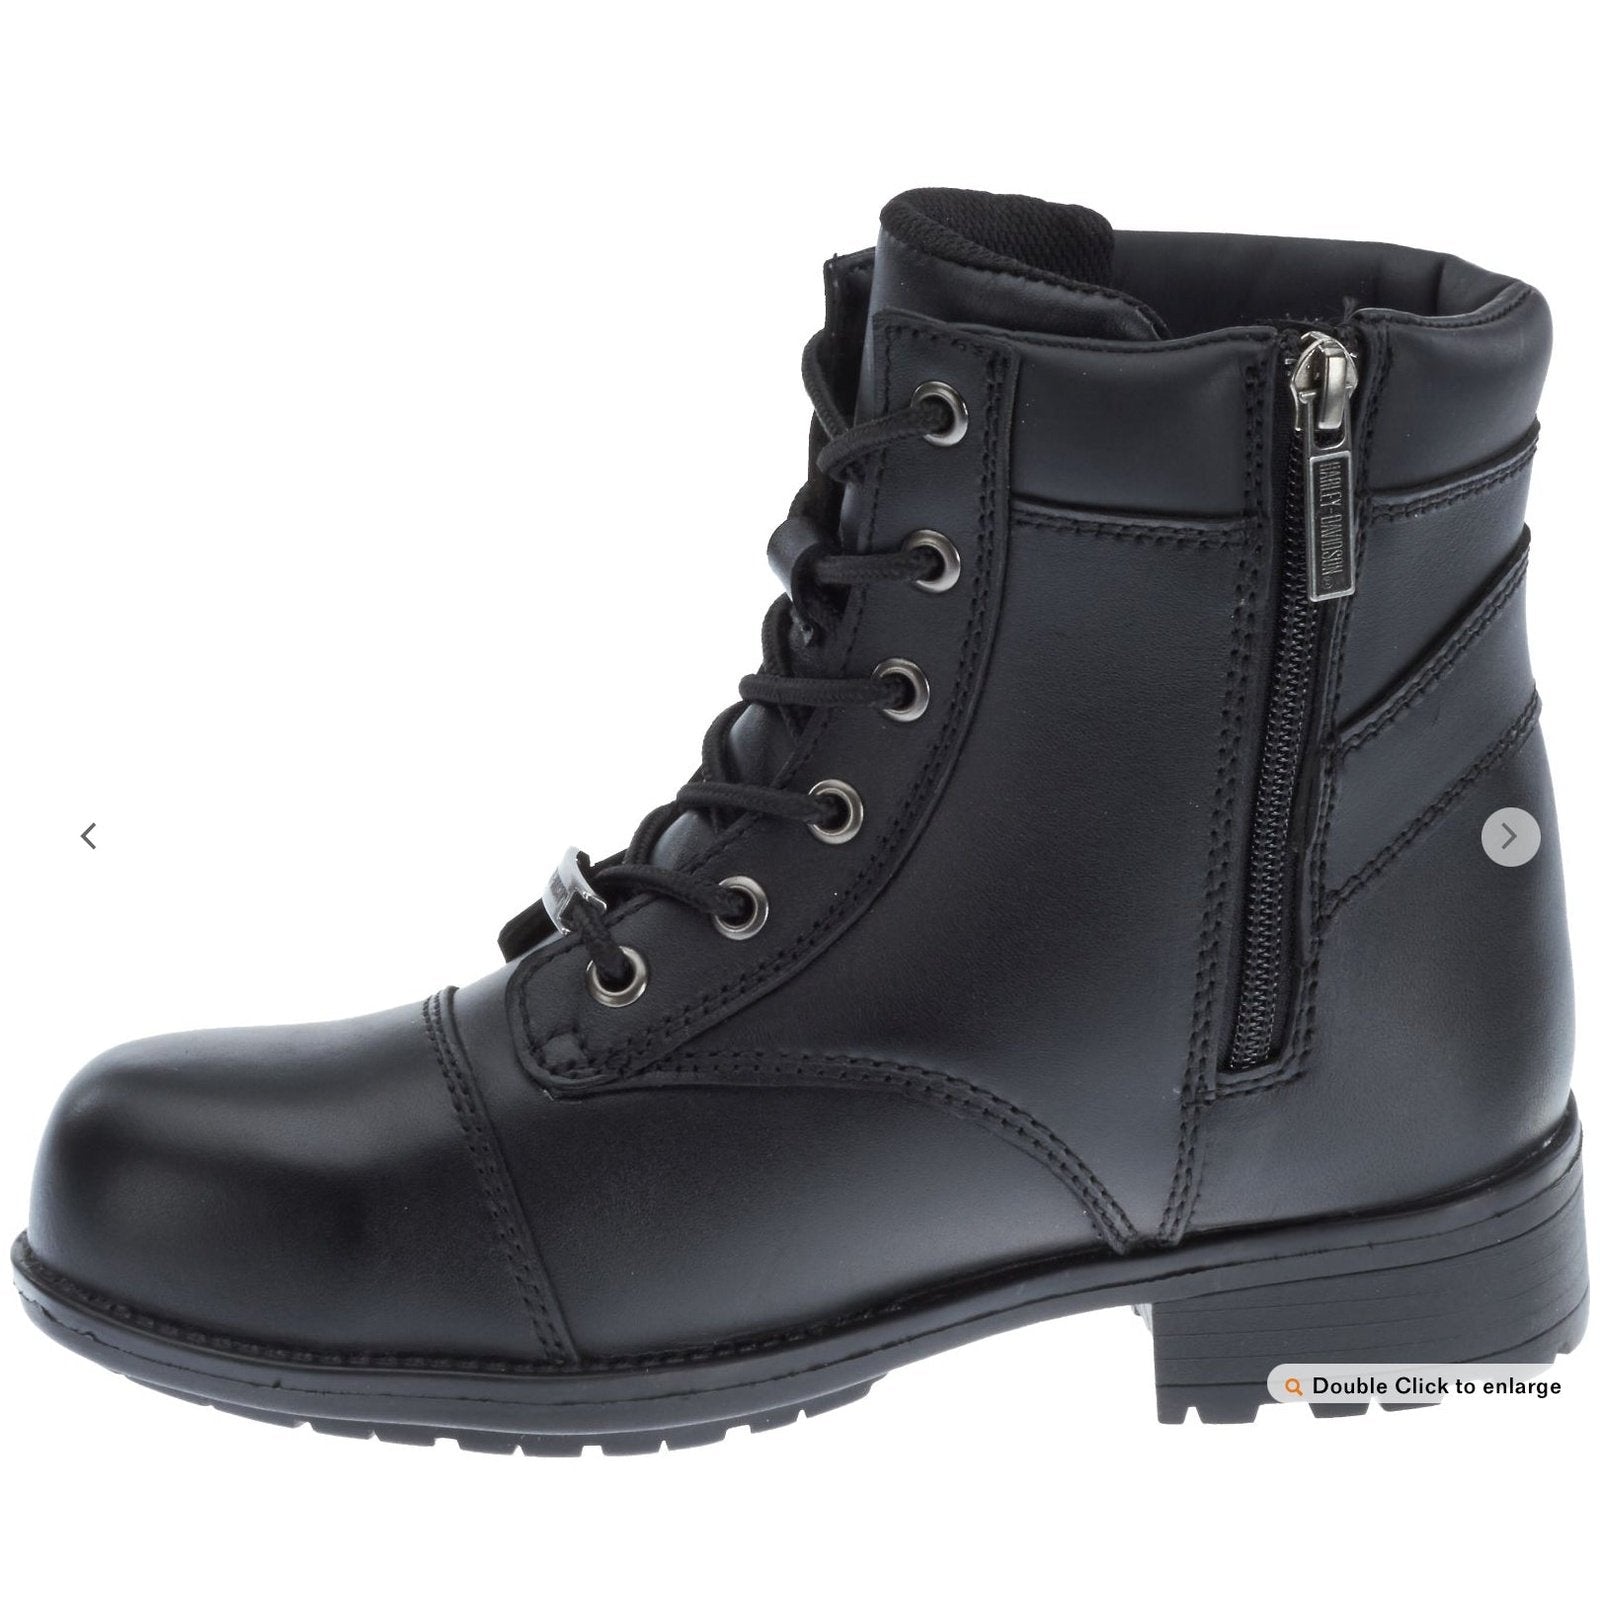 Harley Davidson Women’s Connie CSA Boots 11022 - CLEARANCE